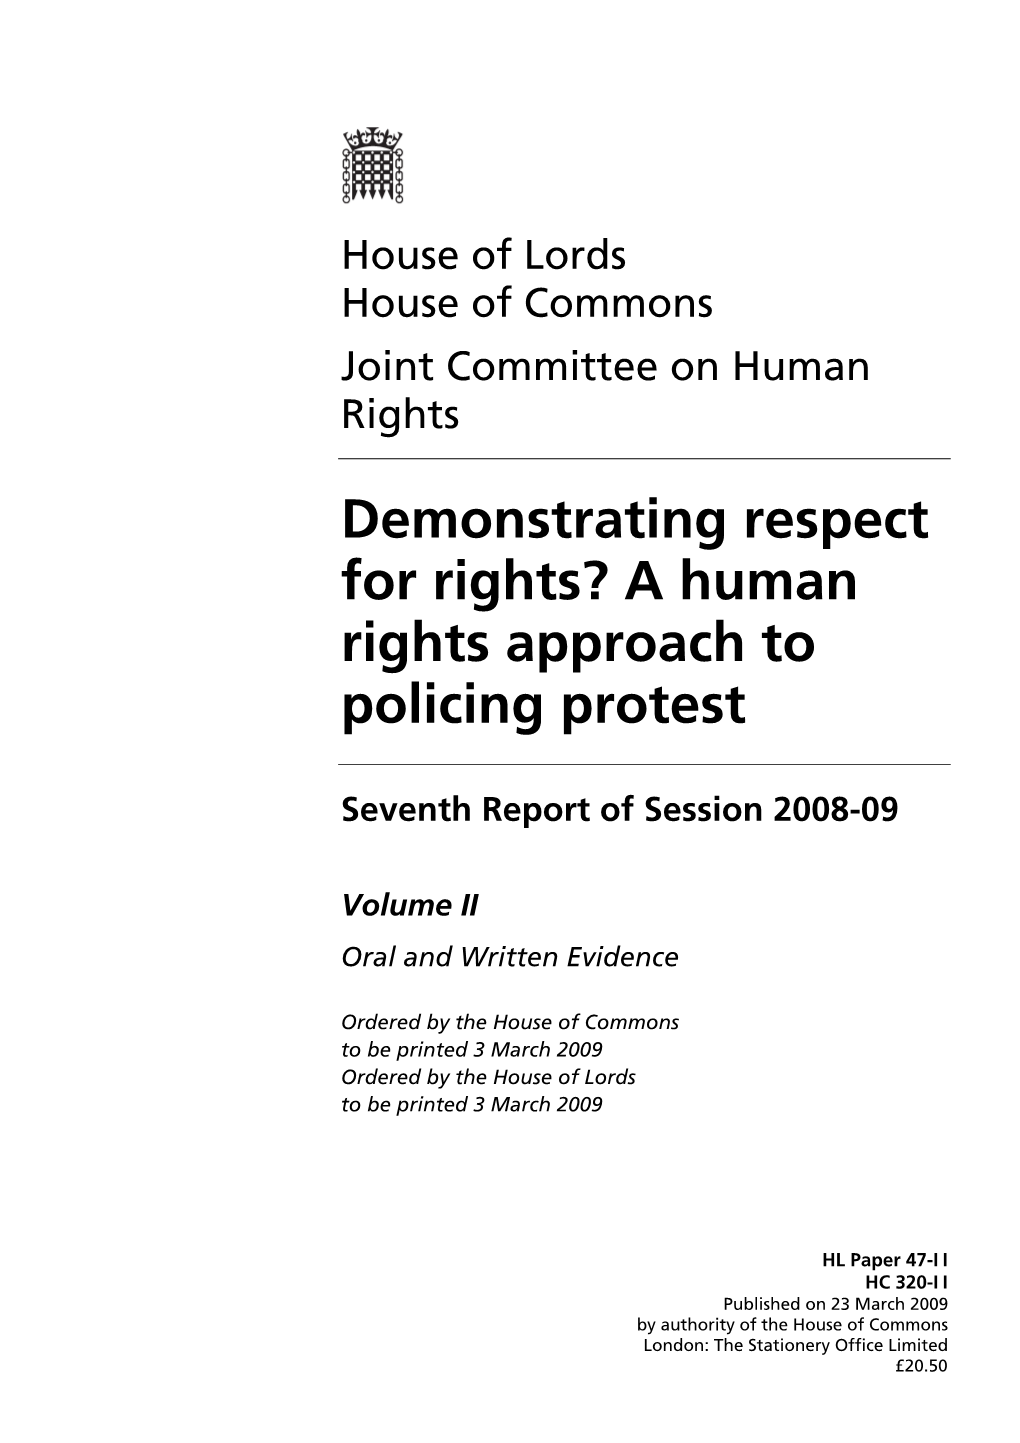 A Human Rights Approach to Policing Protest